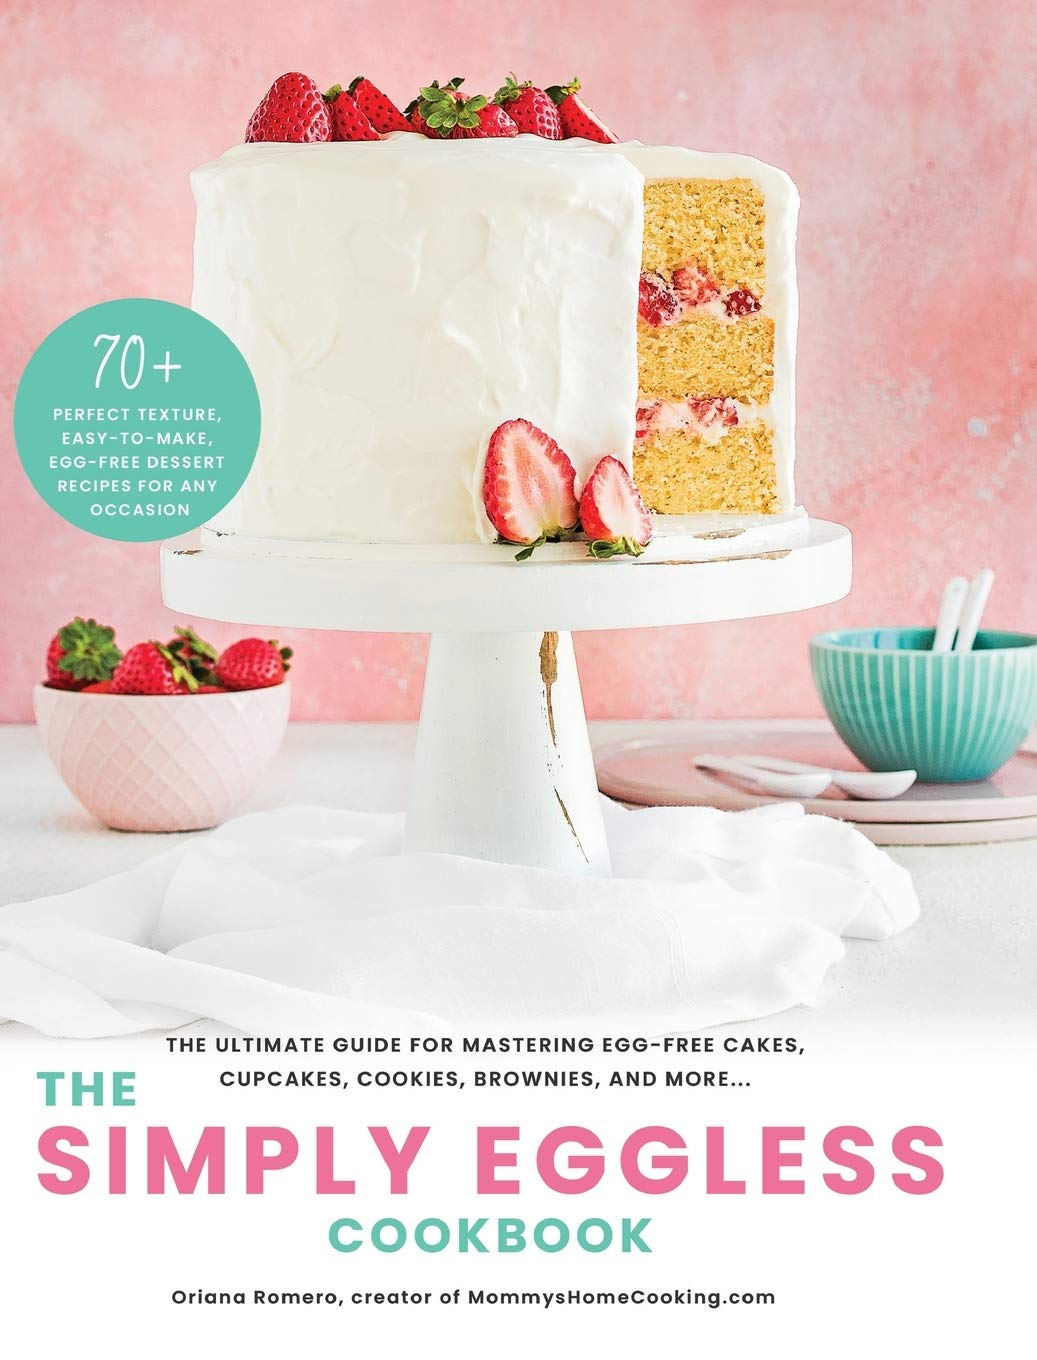 THE SIMPLY EGGLESS COOKBOOK